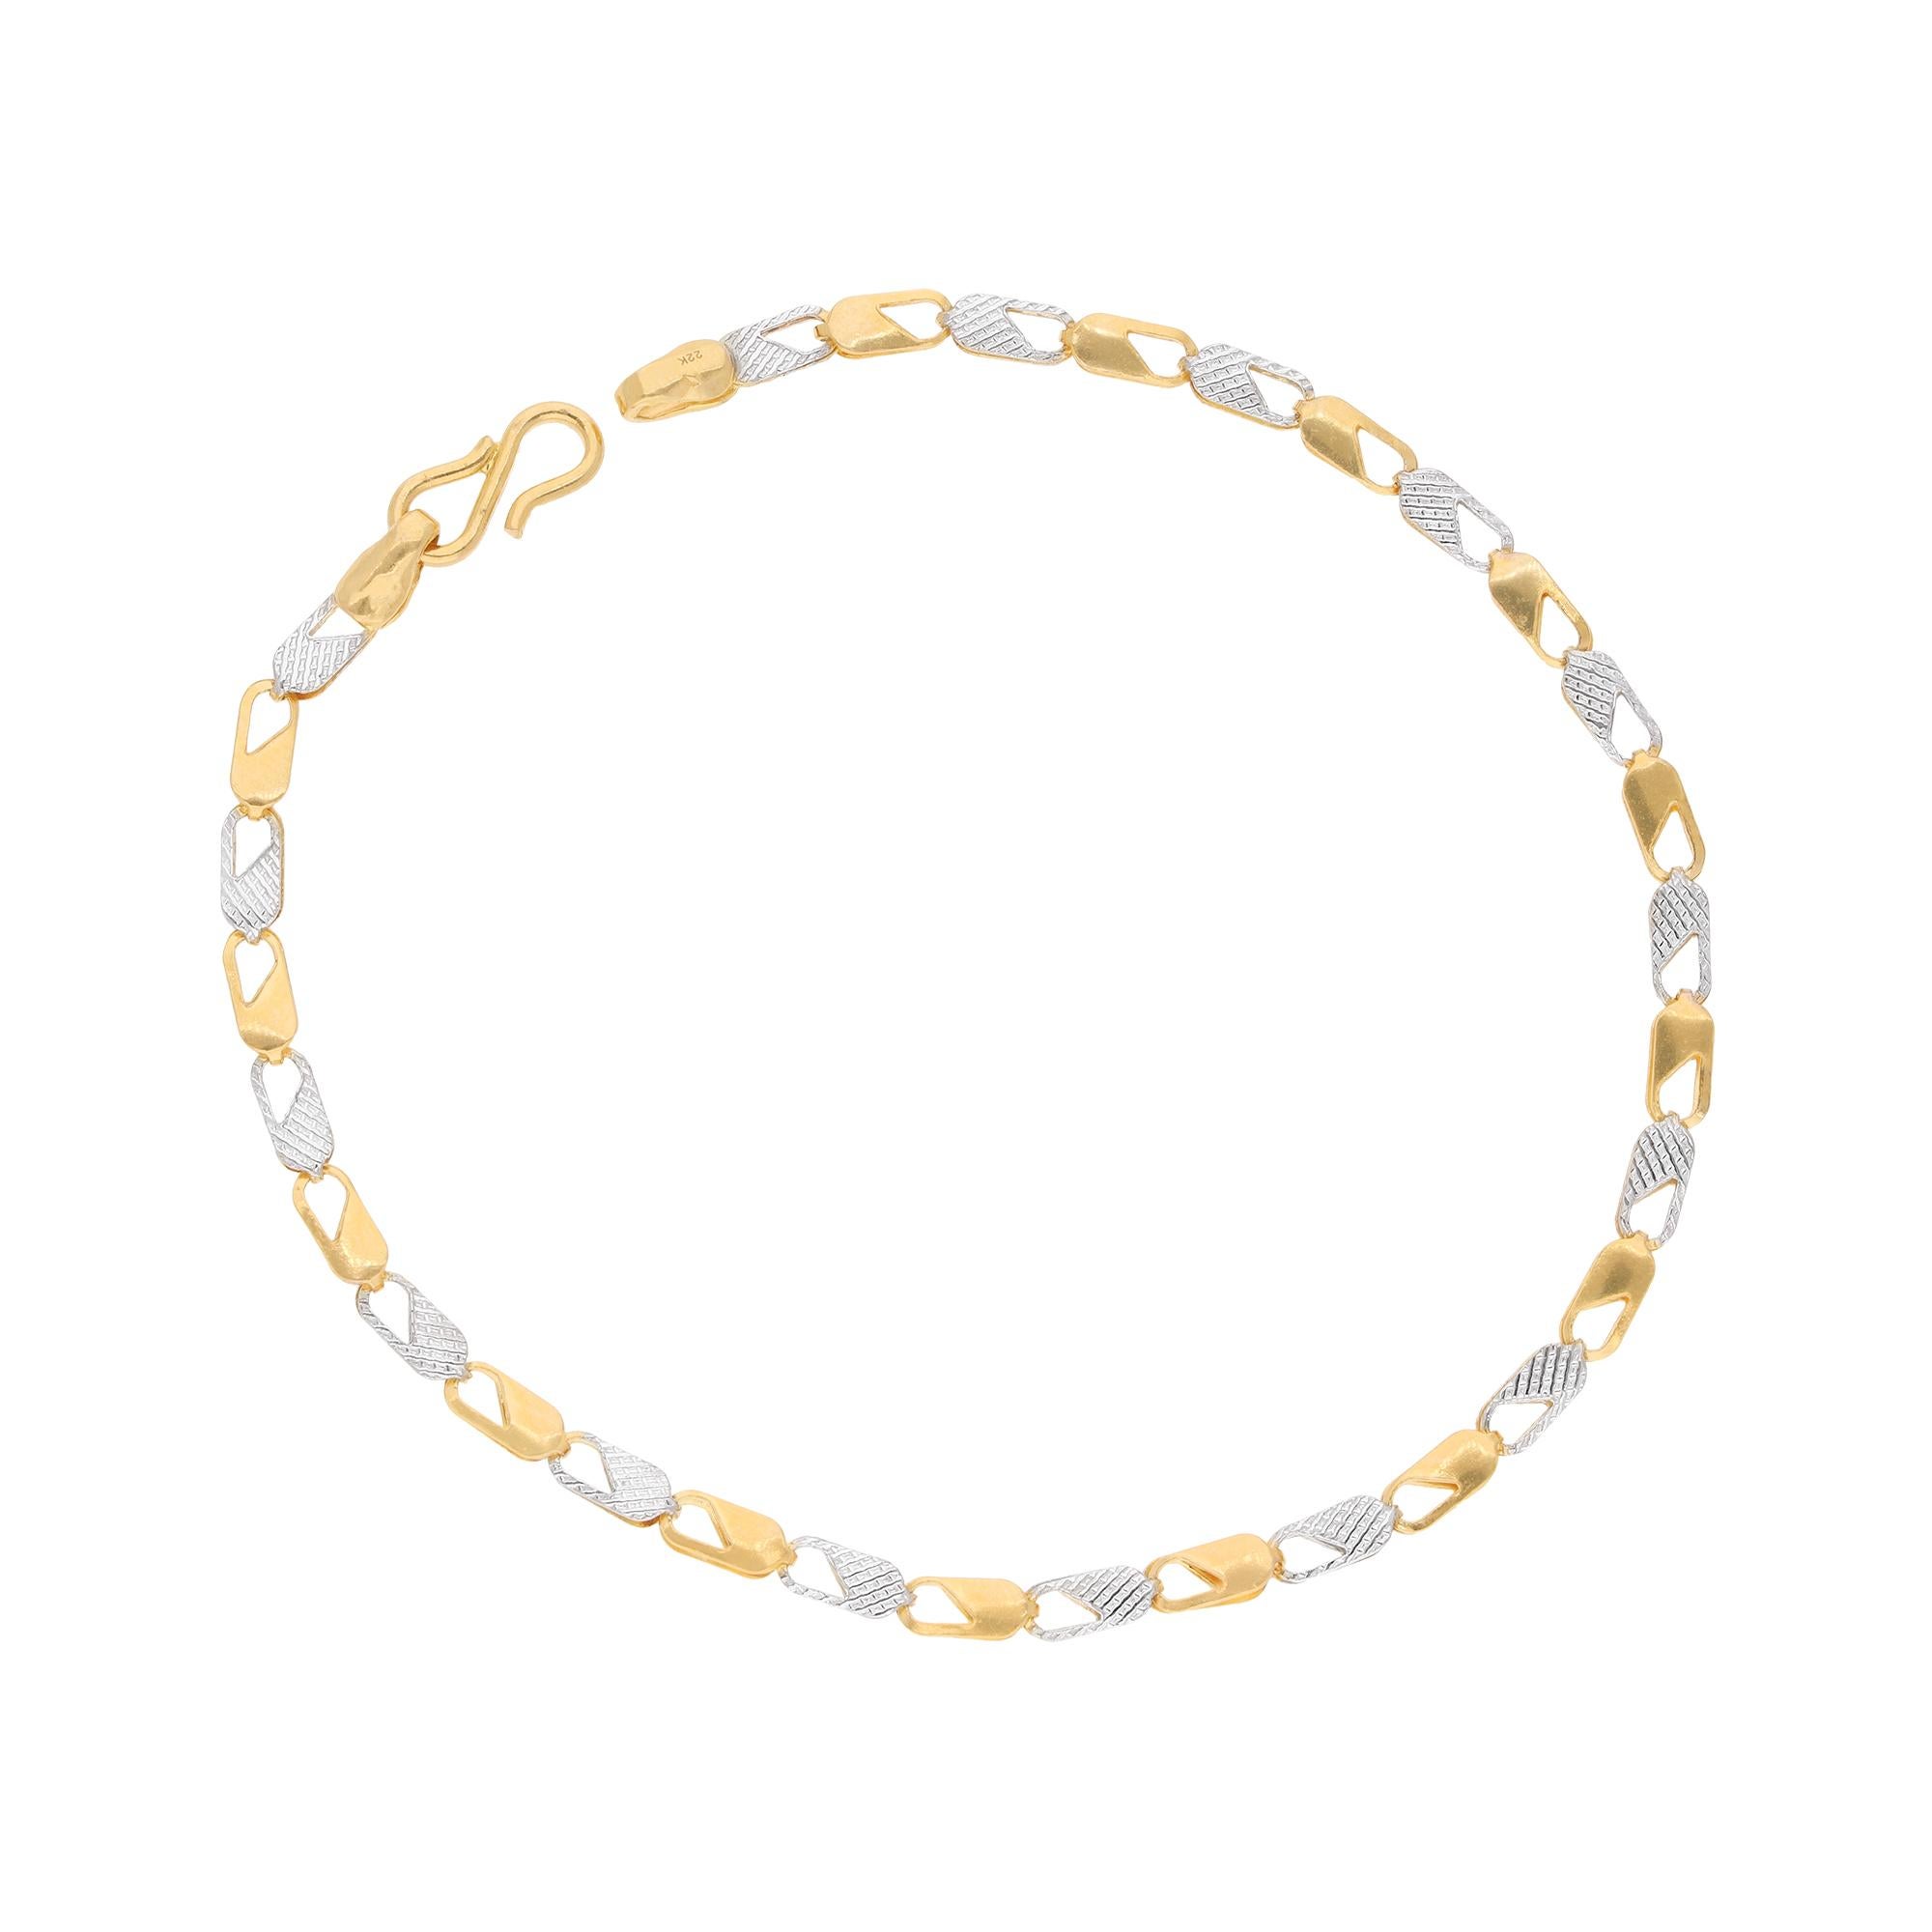 Item Code :- CN-16947
Gross Wt. :- 3.41 gm
22k Yellow Gold Wt. :- 3.41 gm
Bracelet Length :- 6.5 inches Long

✦ Sizing
.....................
We can adjust most items to fit your sizing preferences. Most items can be made to any size and length.